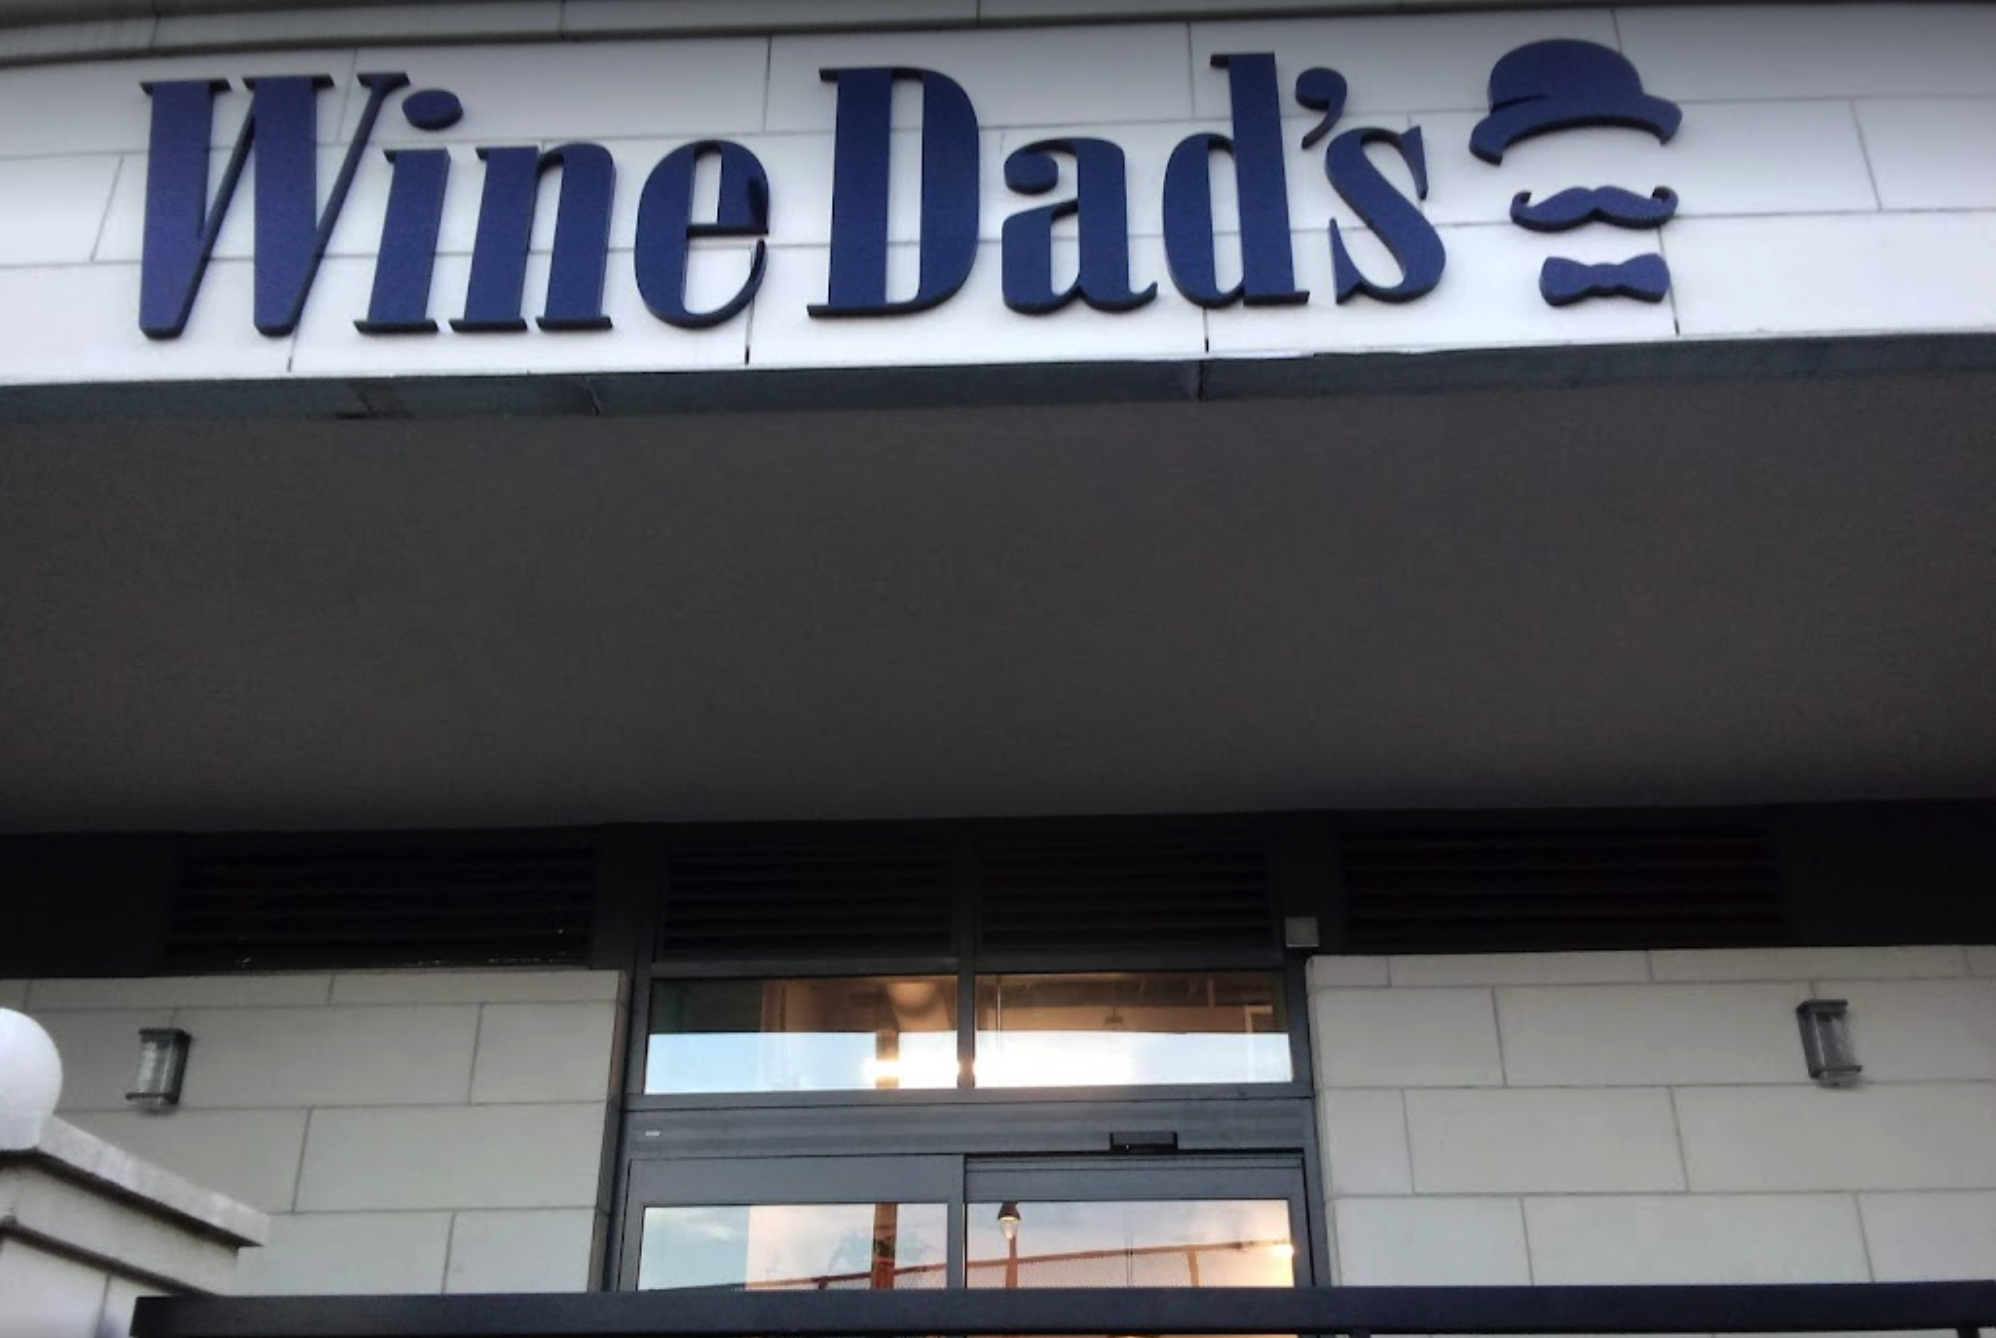 Wine Dad's Liquor in Hoboken, NJ, offers fast and easy liquor delivery on all your favorite brands of beer, wine, alcohol and spirits. Shop online today for fast wine delivery and liquor delivery or visit us in store to see our daily deals.